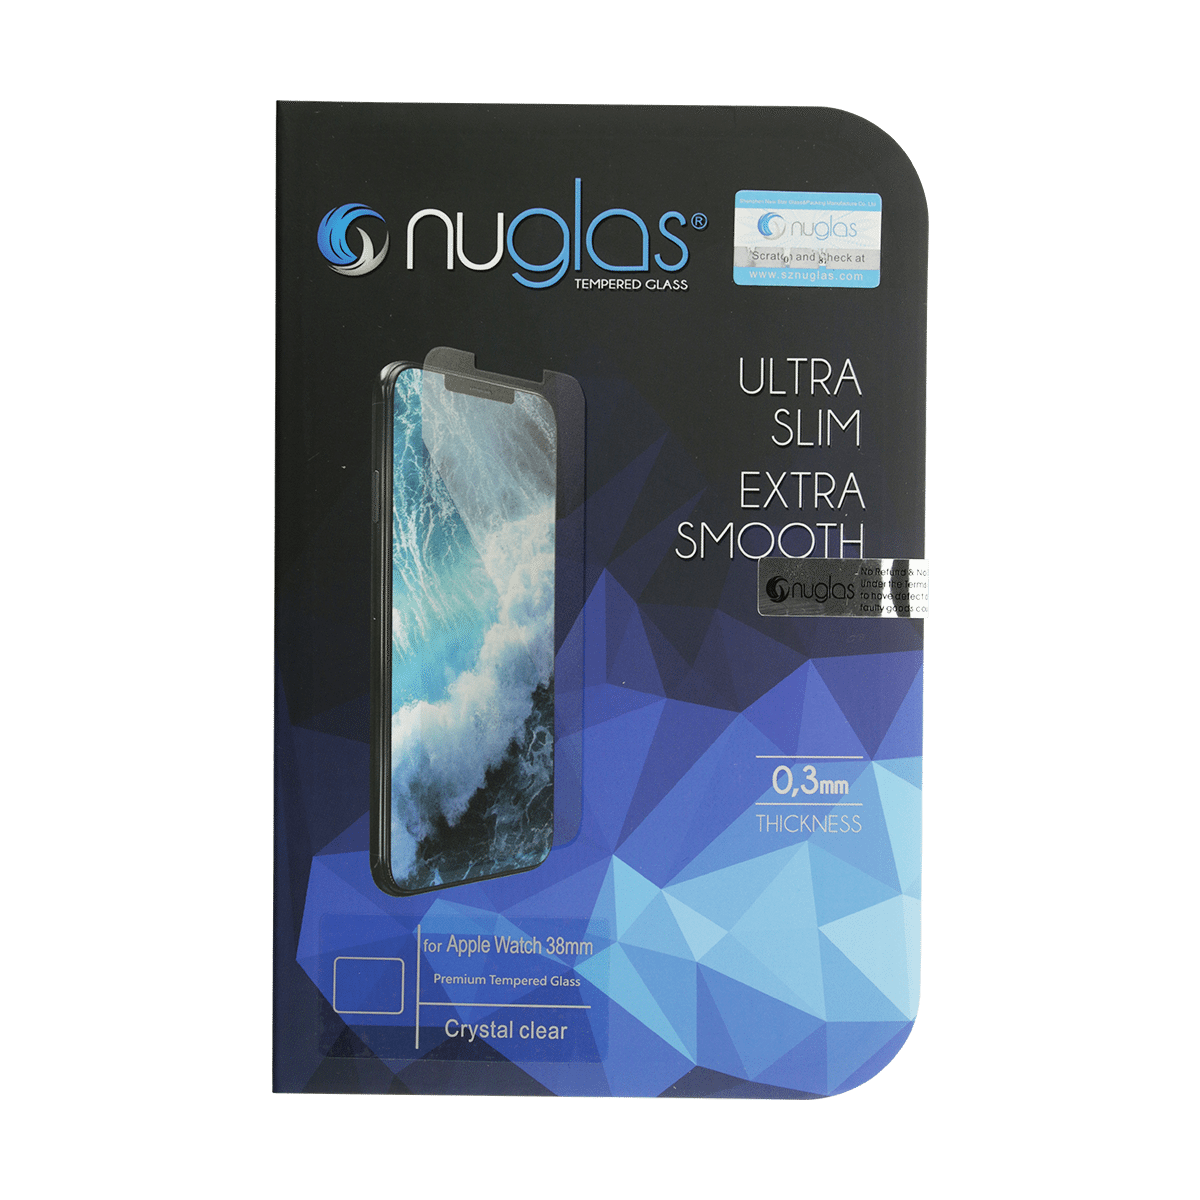 Apple Watch Series 1/2/3 NuGlas Tempered Glass Protection Screen Protector